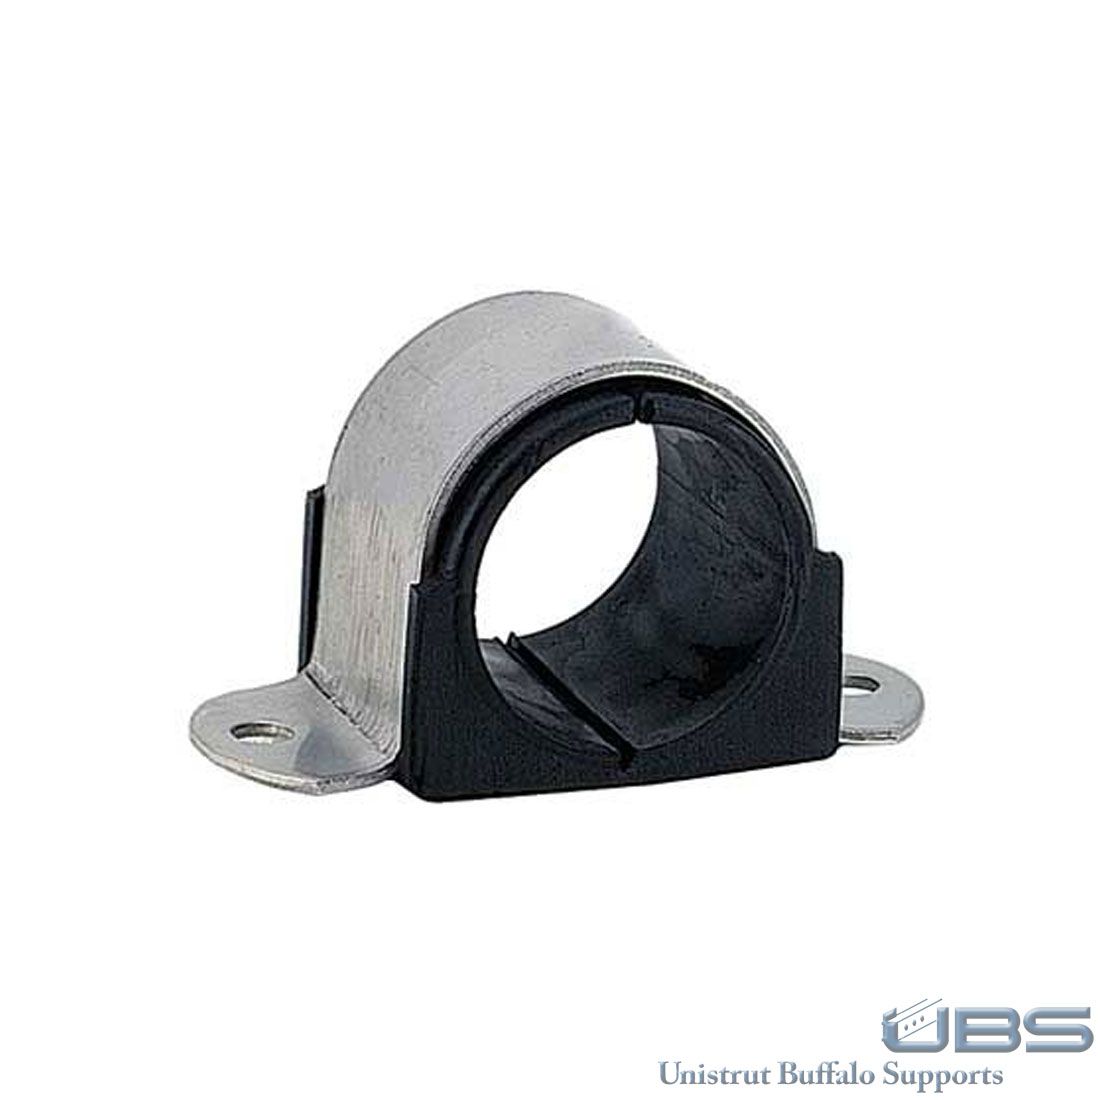 U-Bolt Clamp with Cushion: 3/4 Pipe, Steel, Electro-Galvanized Finish